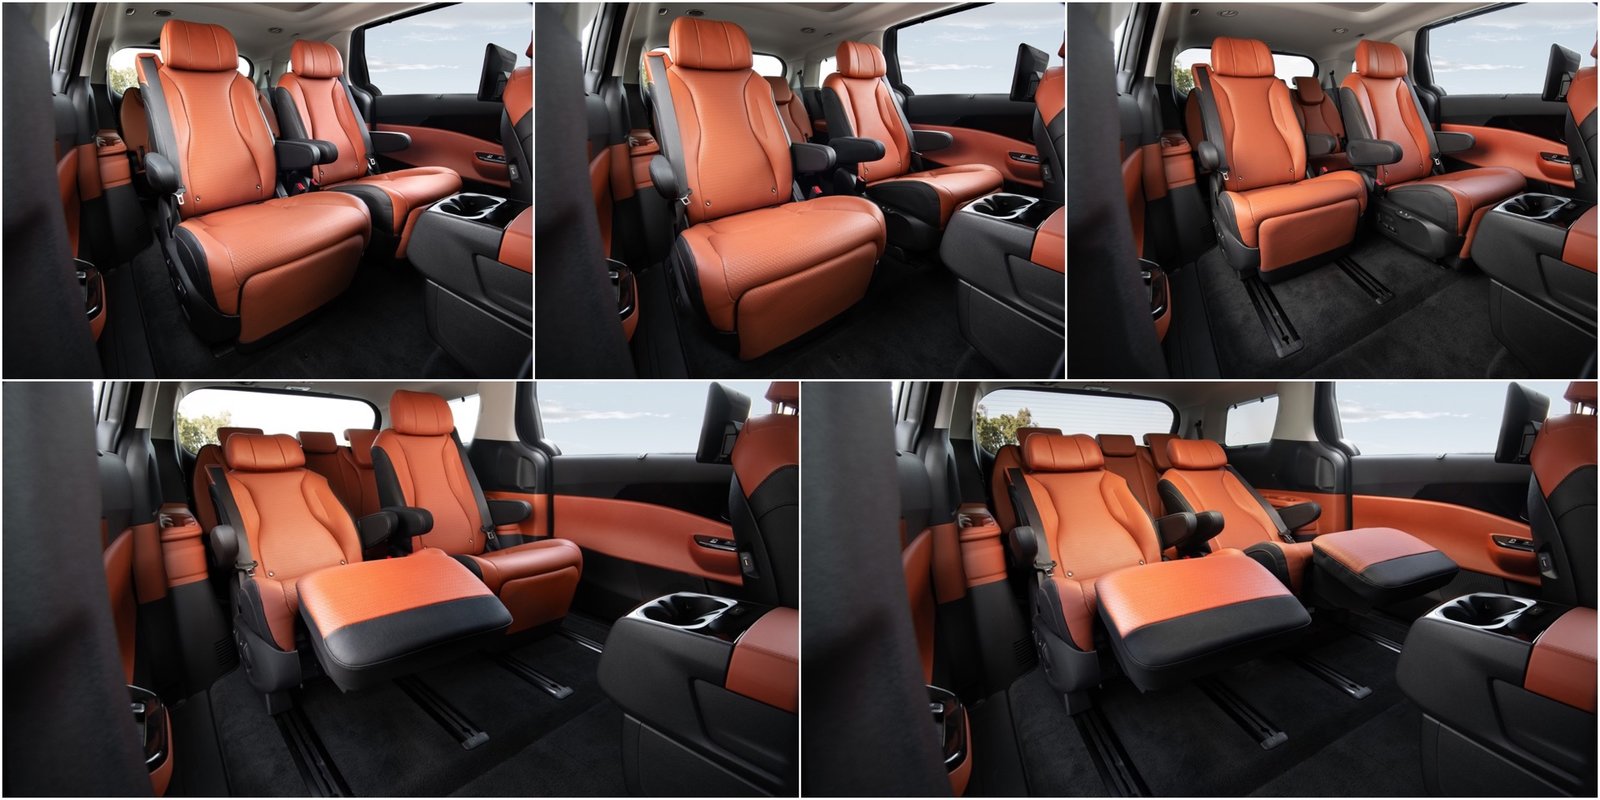 2022 Kia Carnival: What Is VIP Lounge Seating?